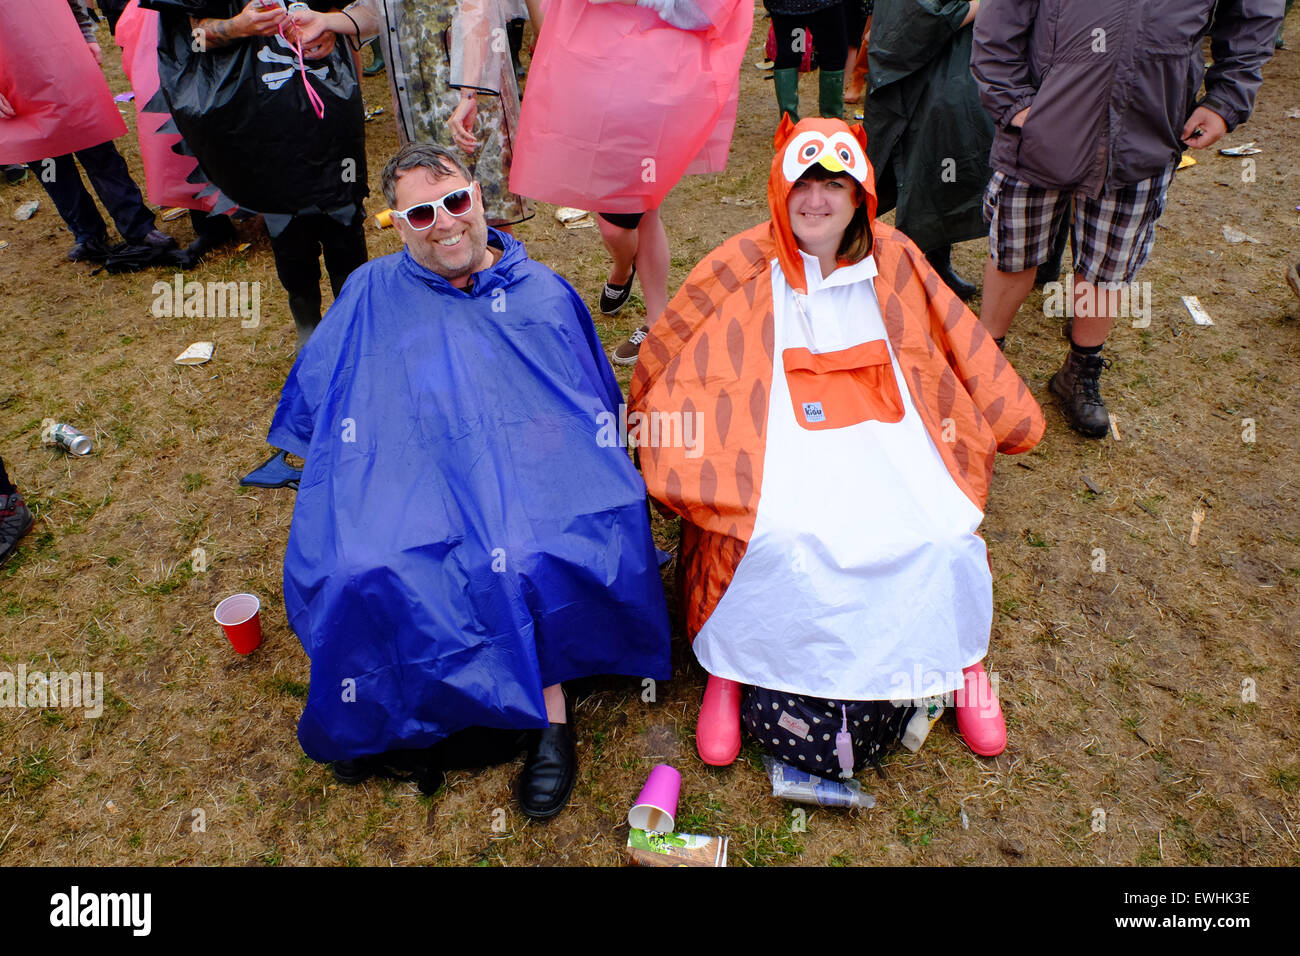 Glastonbury Festival, Somerset, UK. 26 June 2015. It would not be Glastonbury without some rain! Some are more prepared than others but spirits stay high and the music continues despite a heavy mid afternoon downpour. Credit:  Tom Corban/Alamy Live News Stock Photo